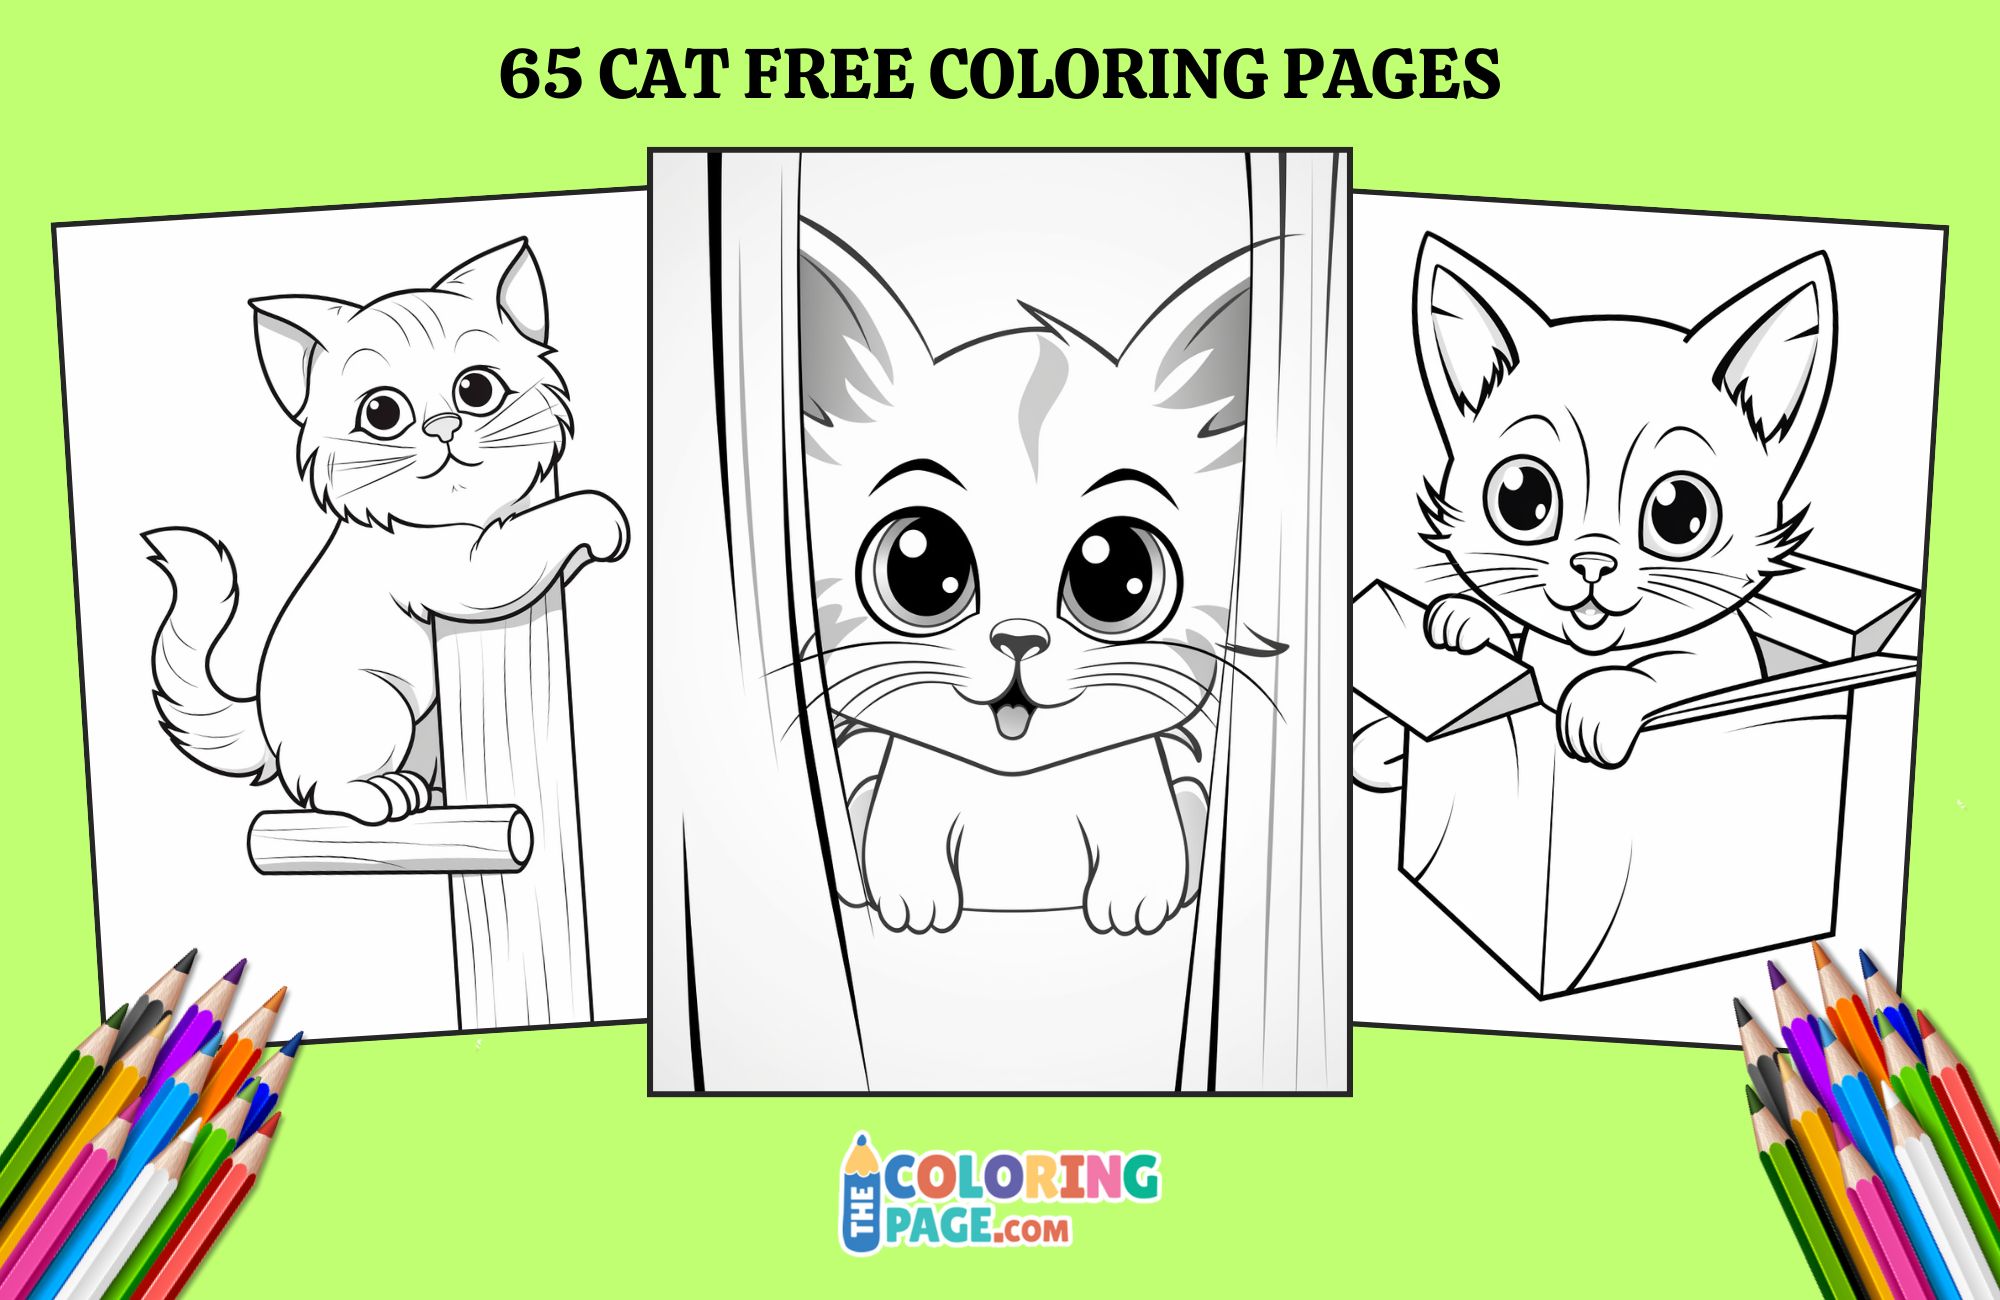 65 Cat Coloring Pages for kids